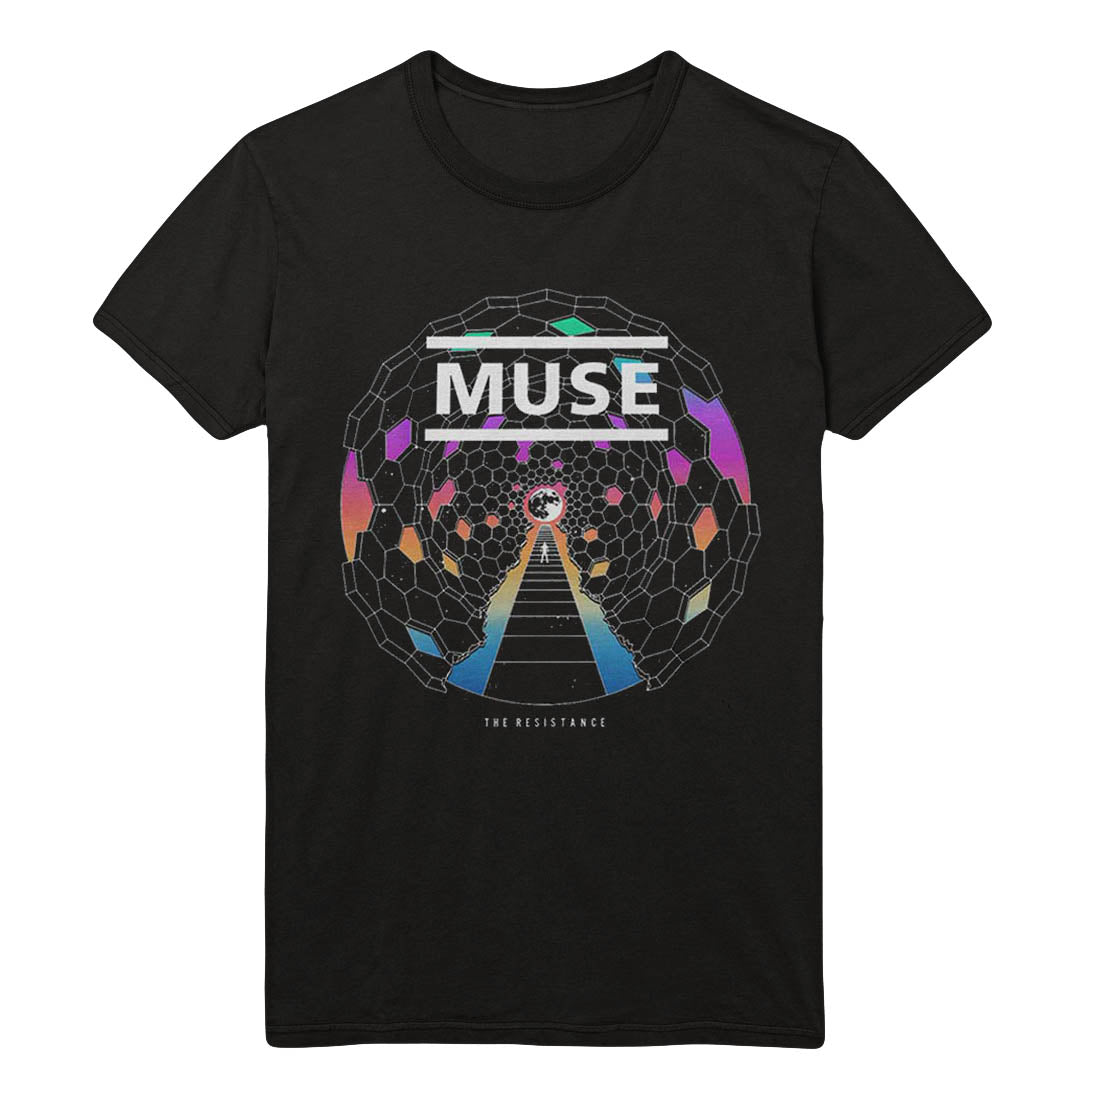 Muse Resistance Moon T-Shirt